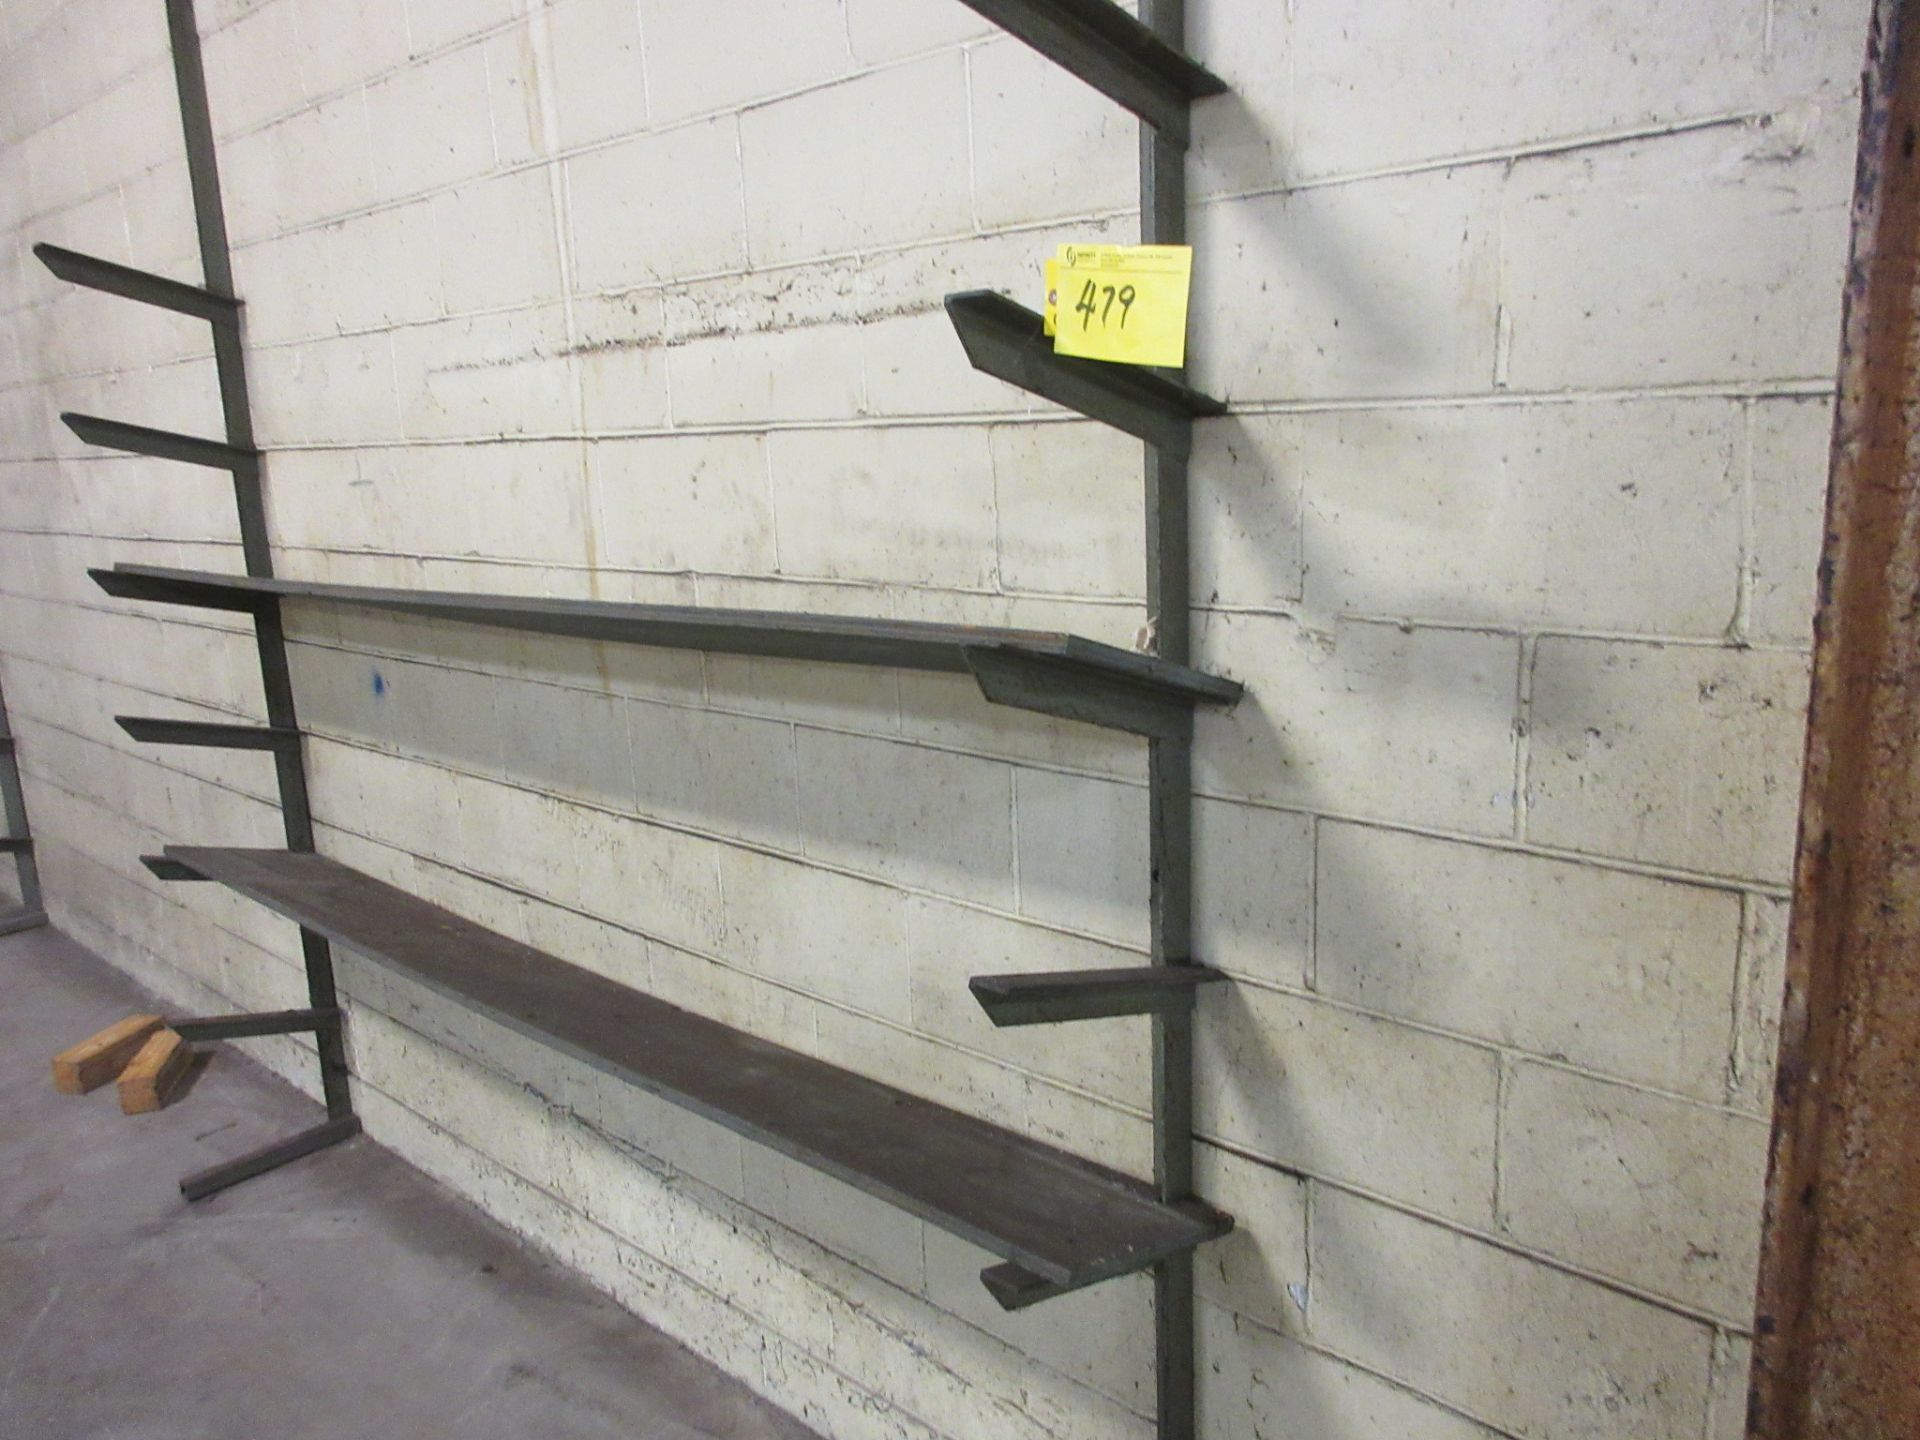 LOT OF (3) APPROX. 8'W X 8'H X 14"L WALL MOUNTED SHELVING UNITS (5 UPRIGHTS, 7-LEVELS) - Image 3 of 3